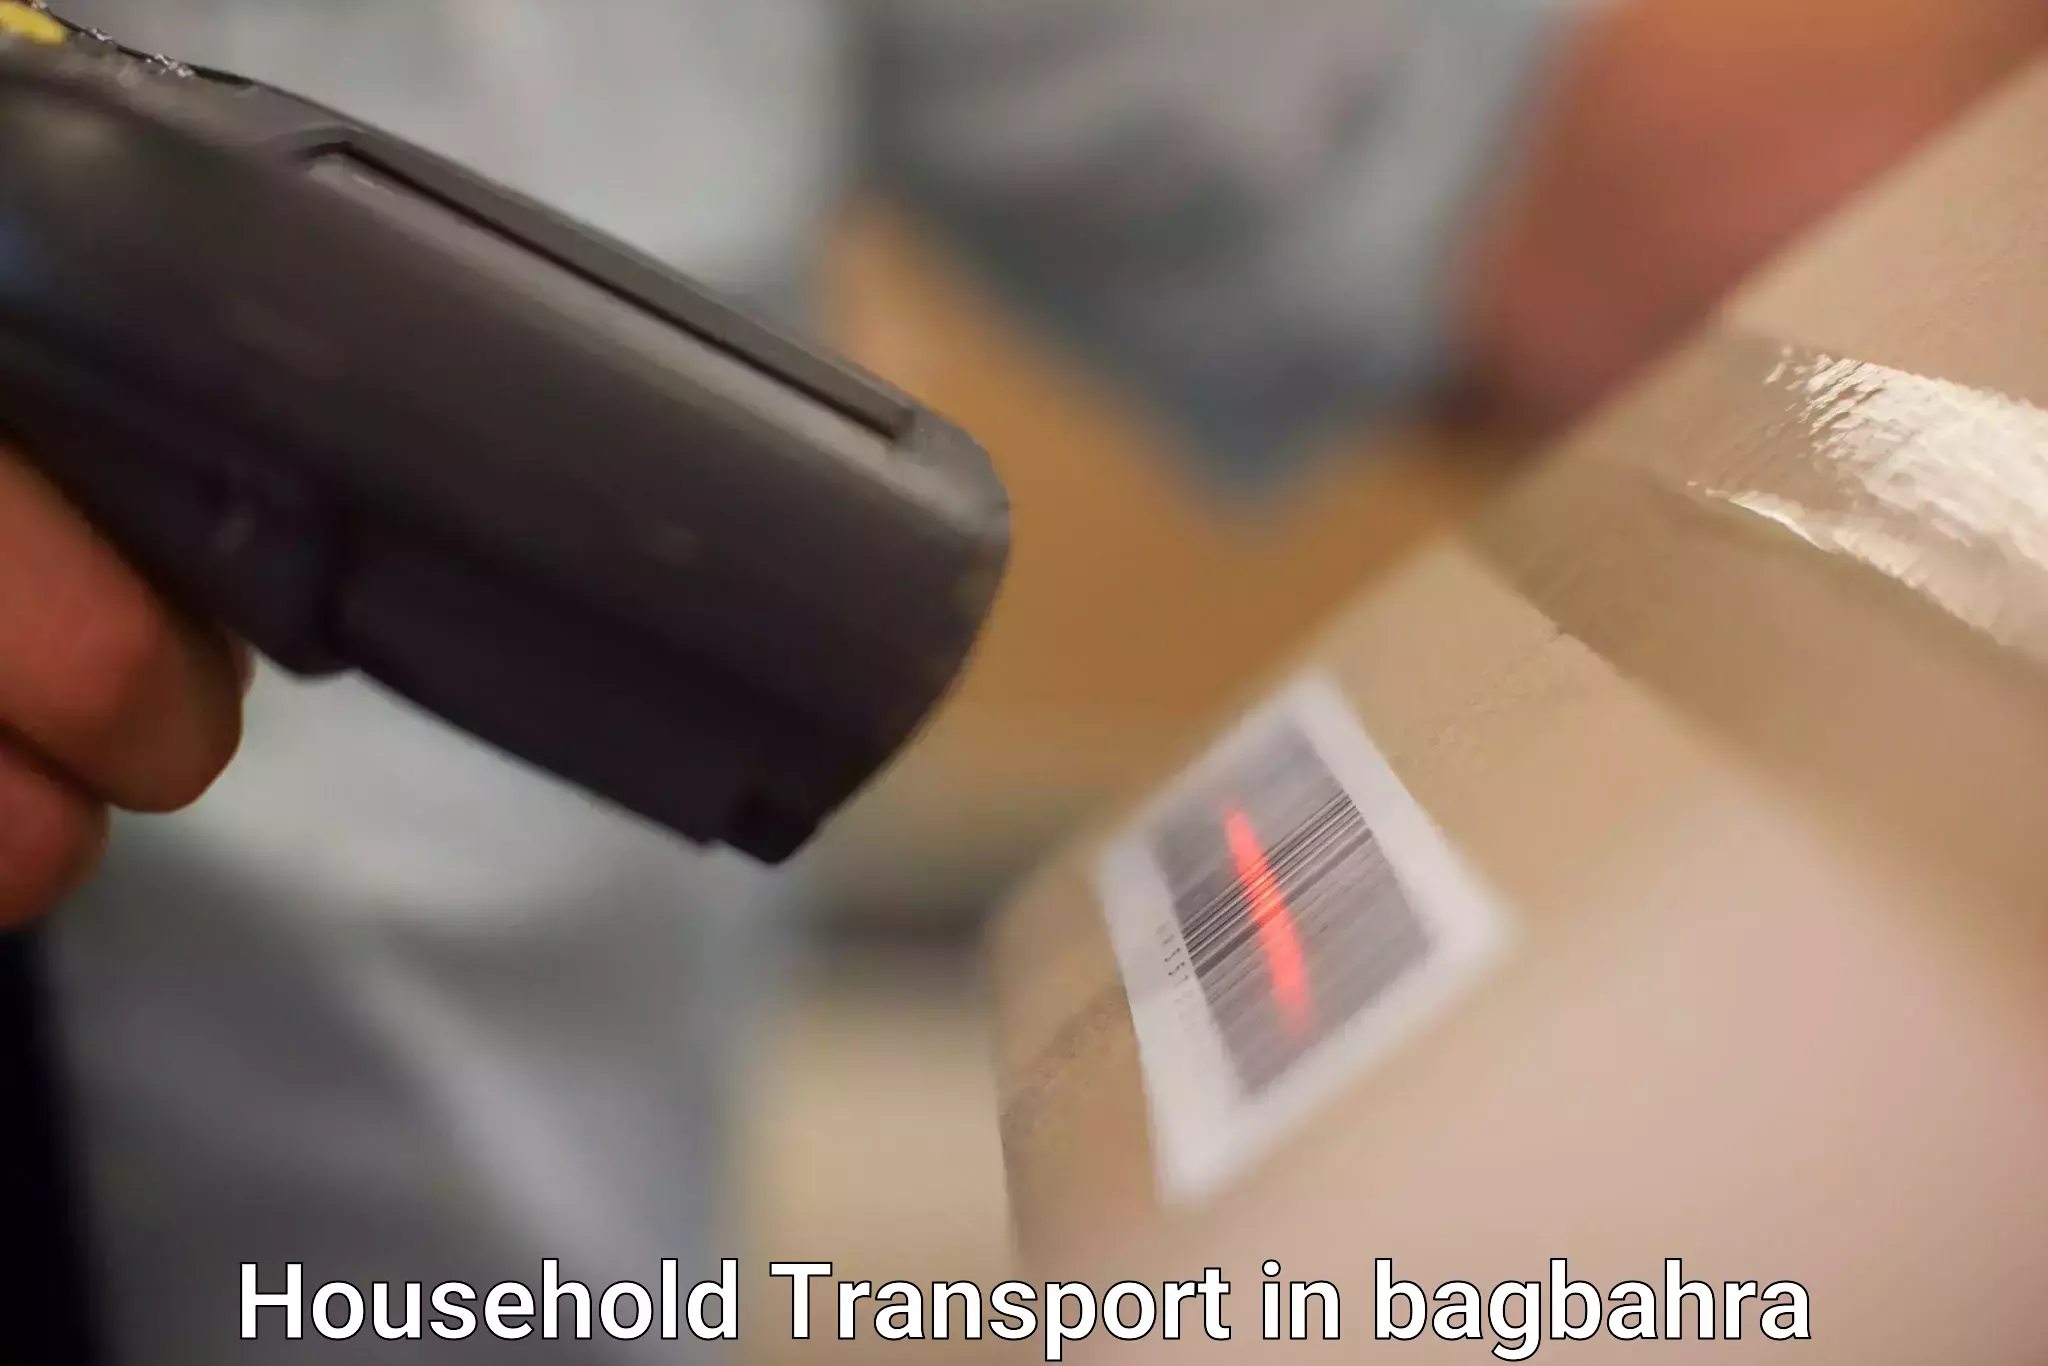 Household transport experts in bagbahra